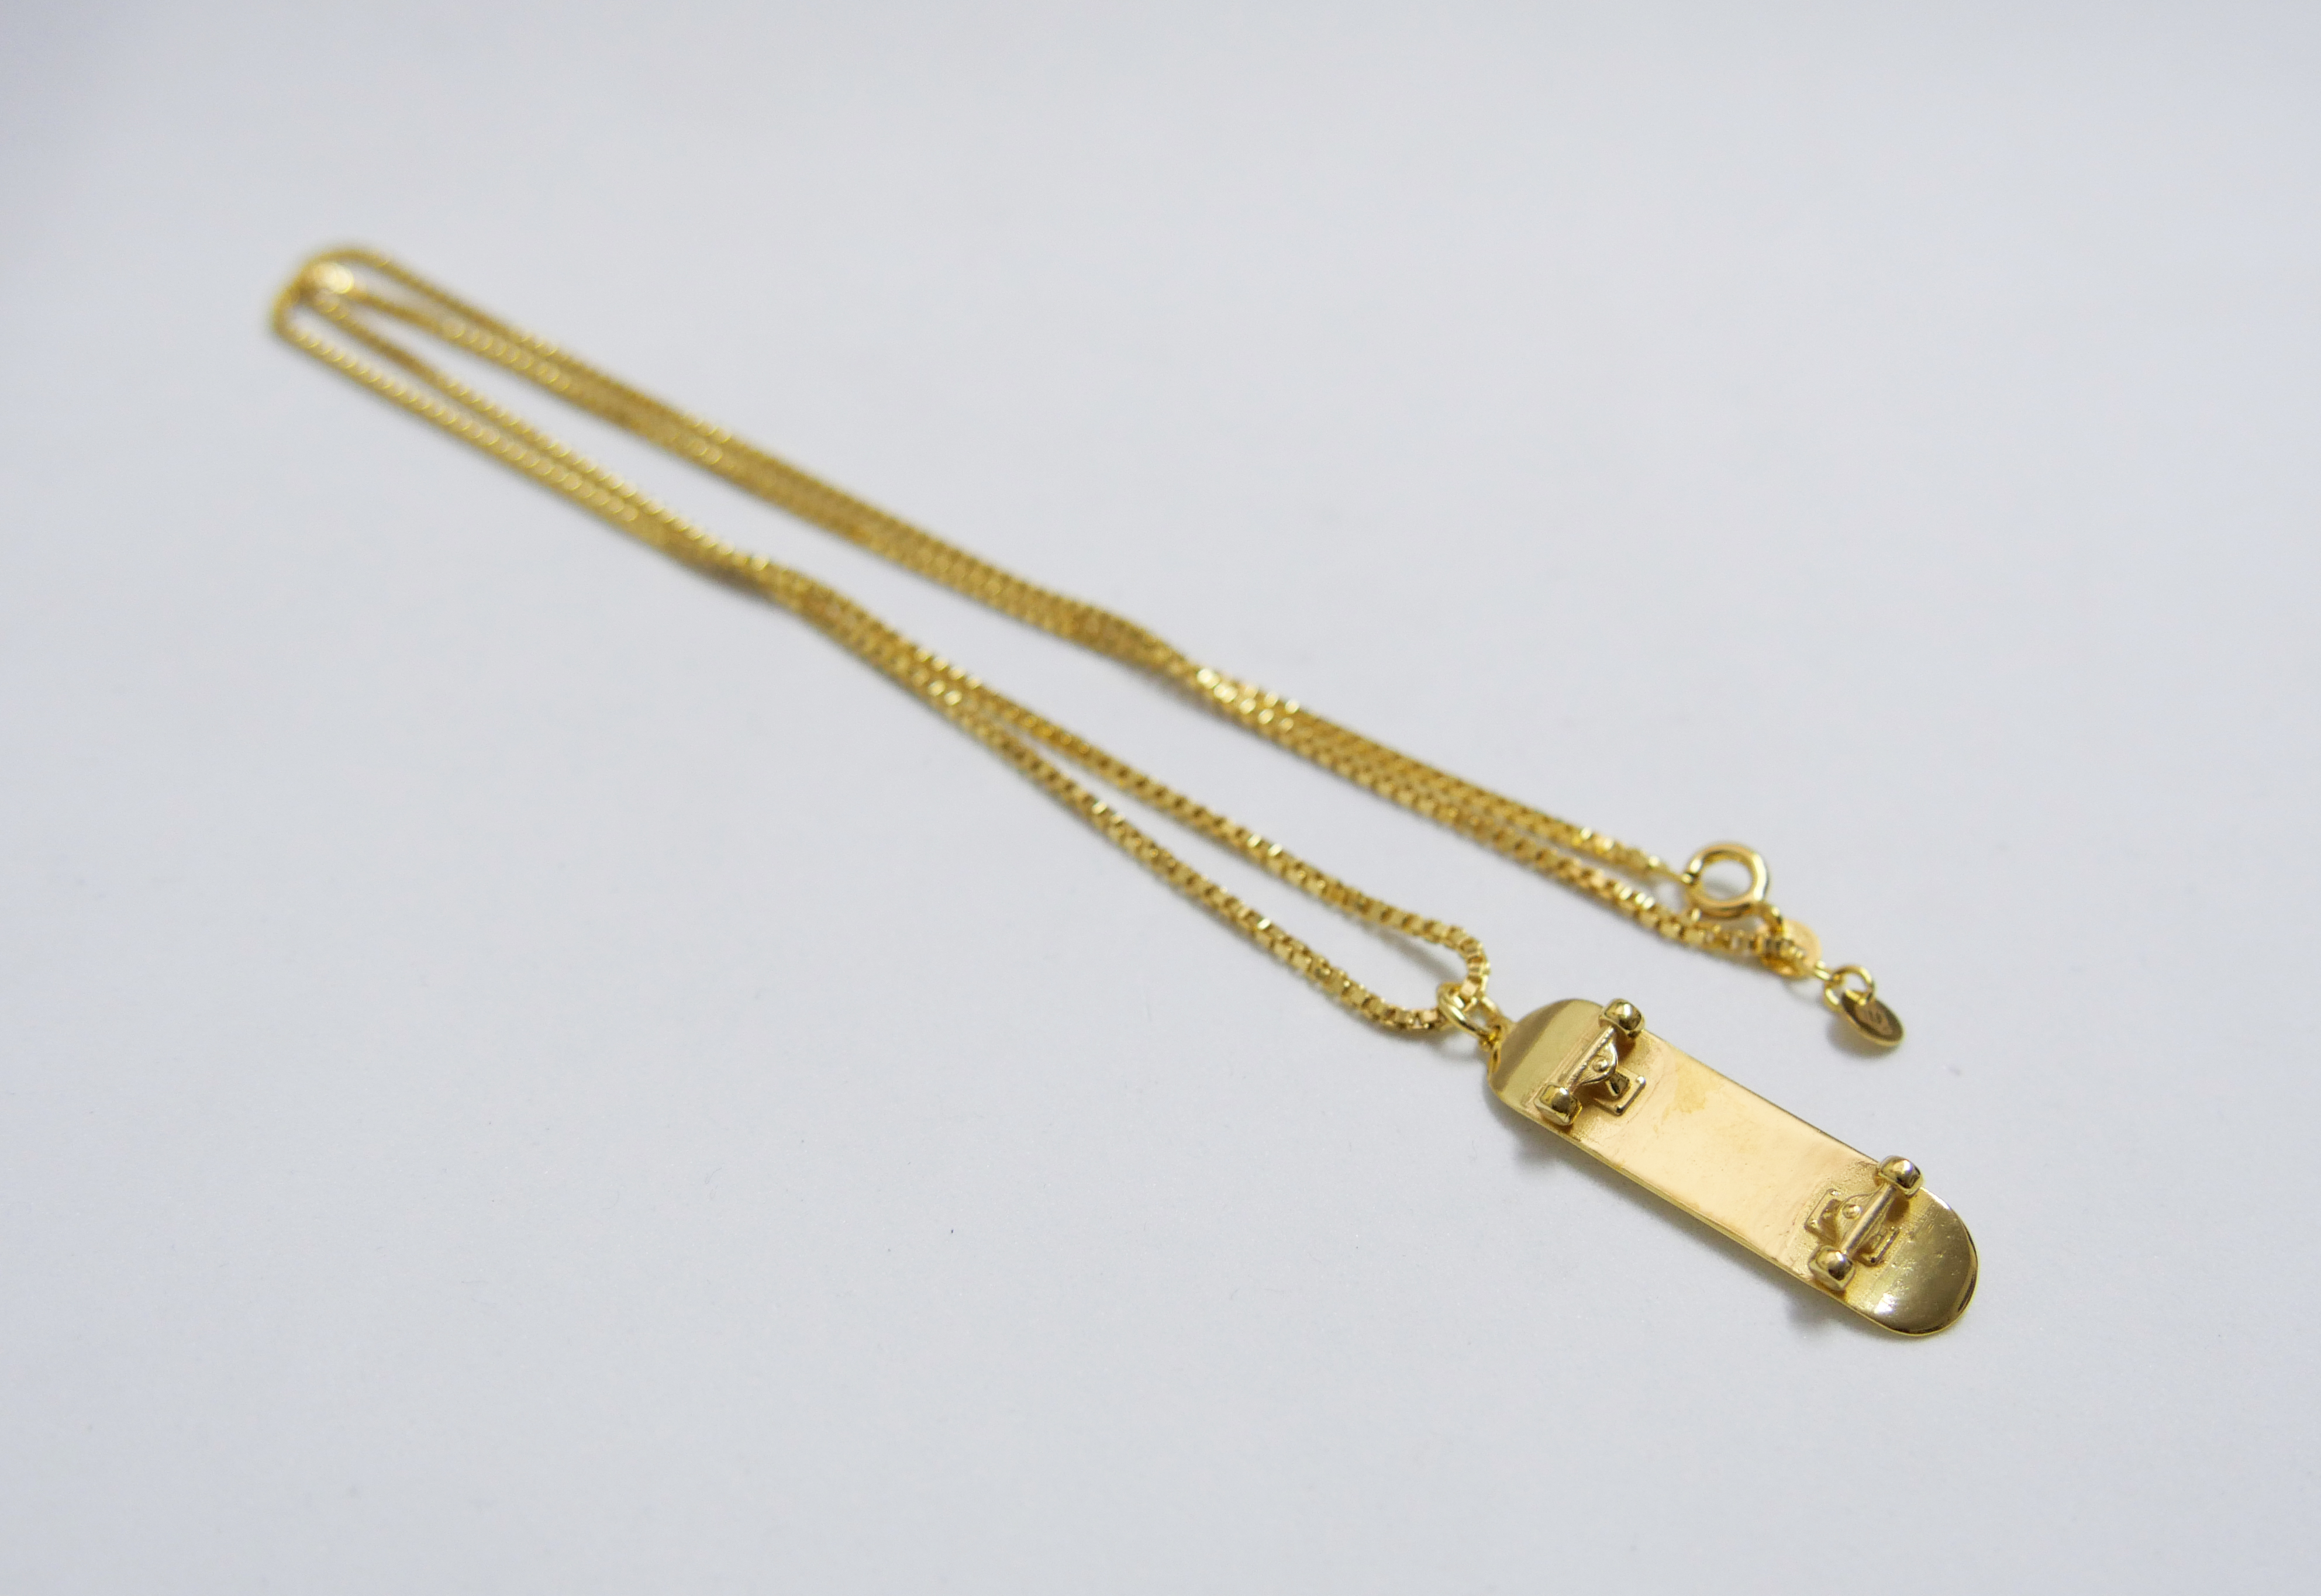 SKATE Necklace Gold 24K Plated - Jeffrey Luque